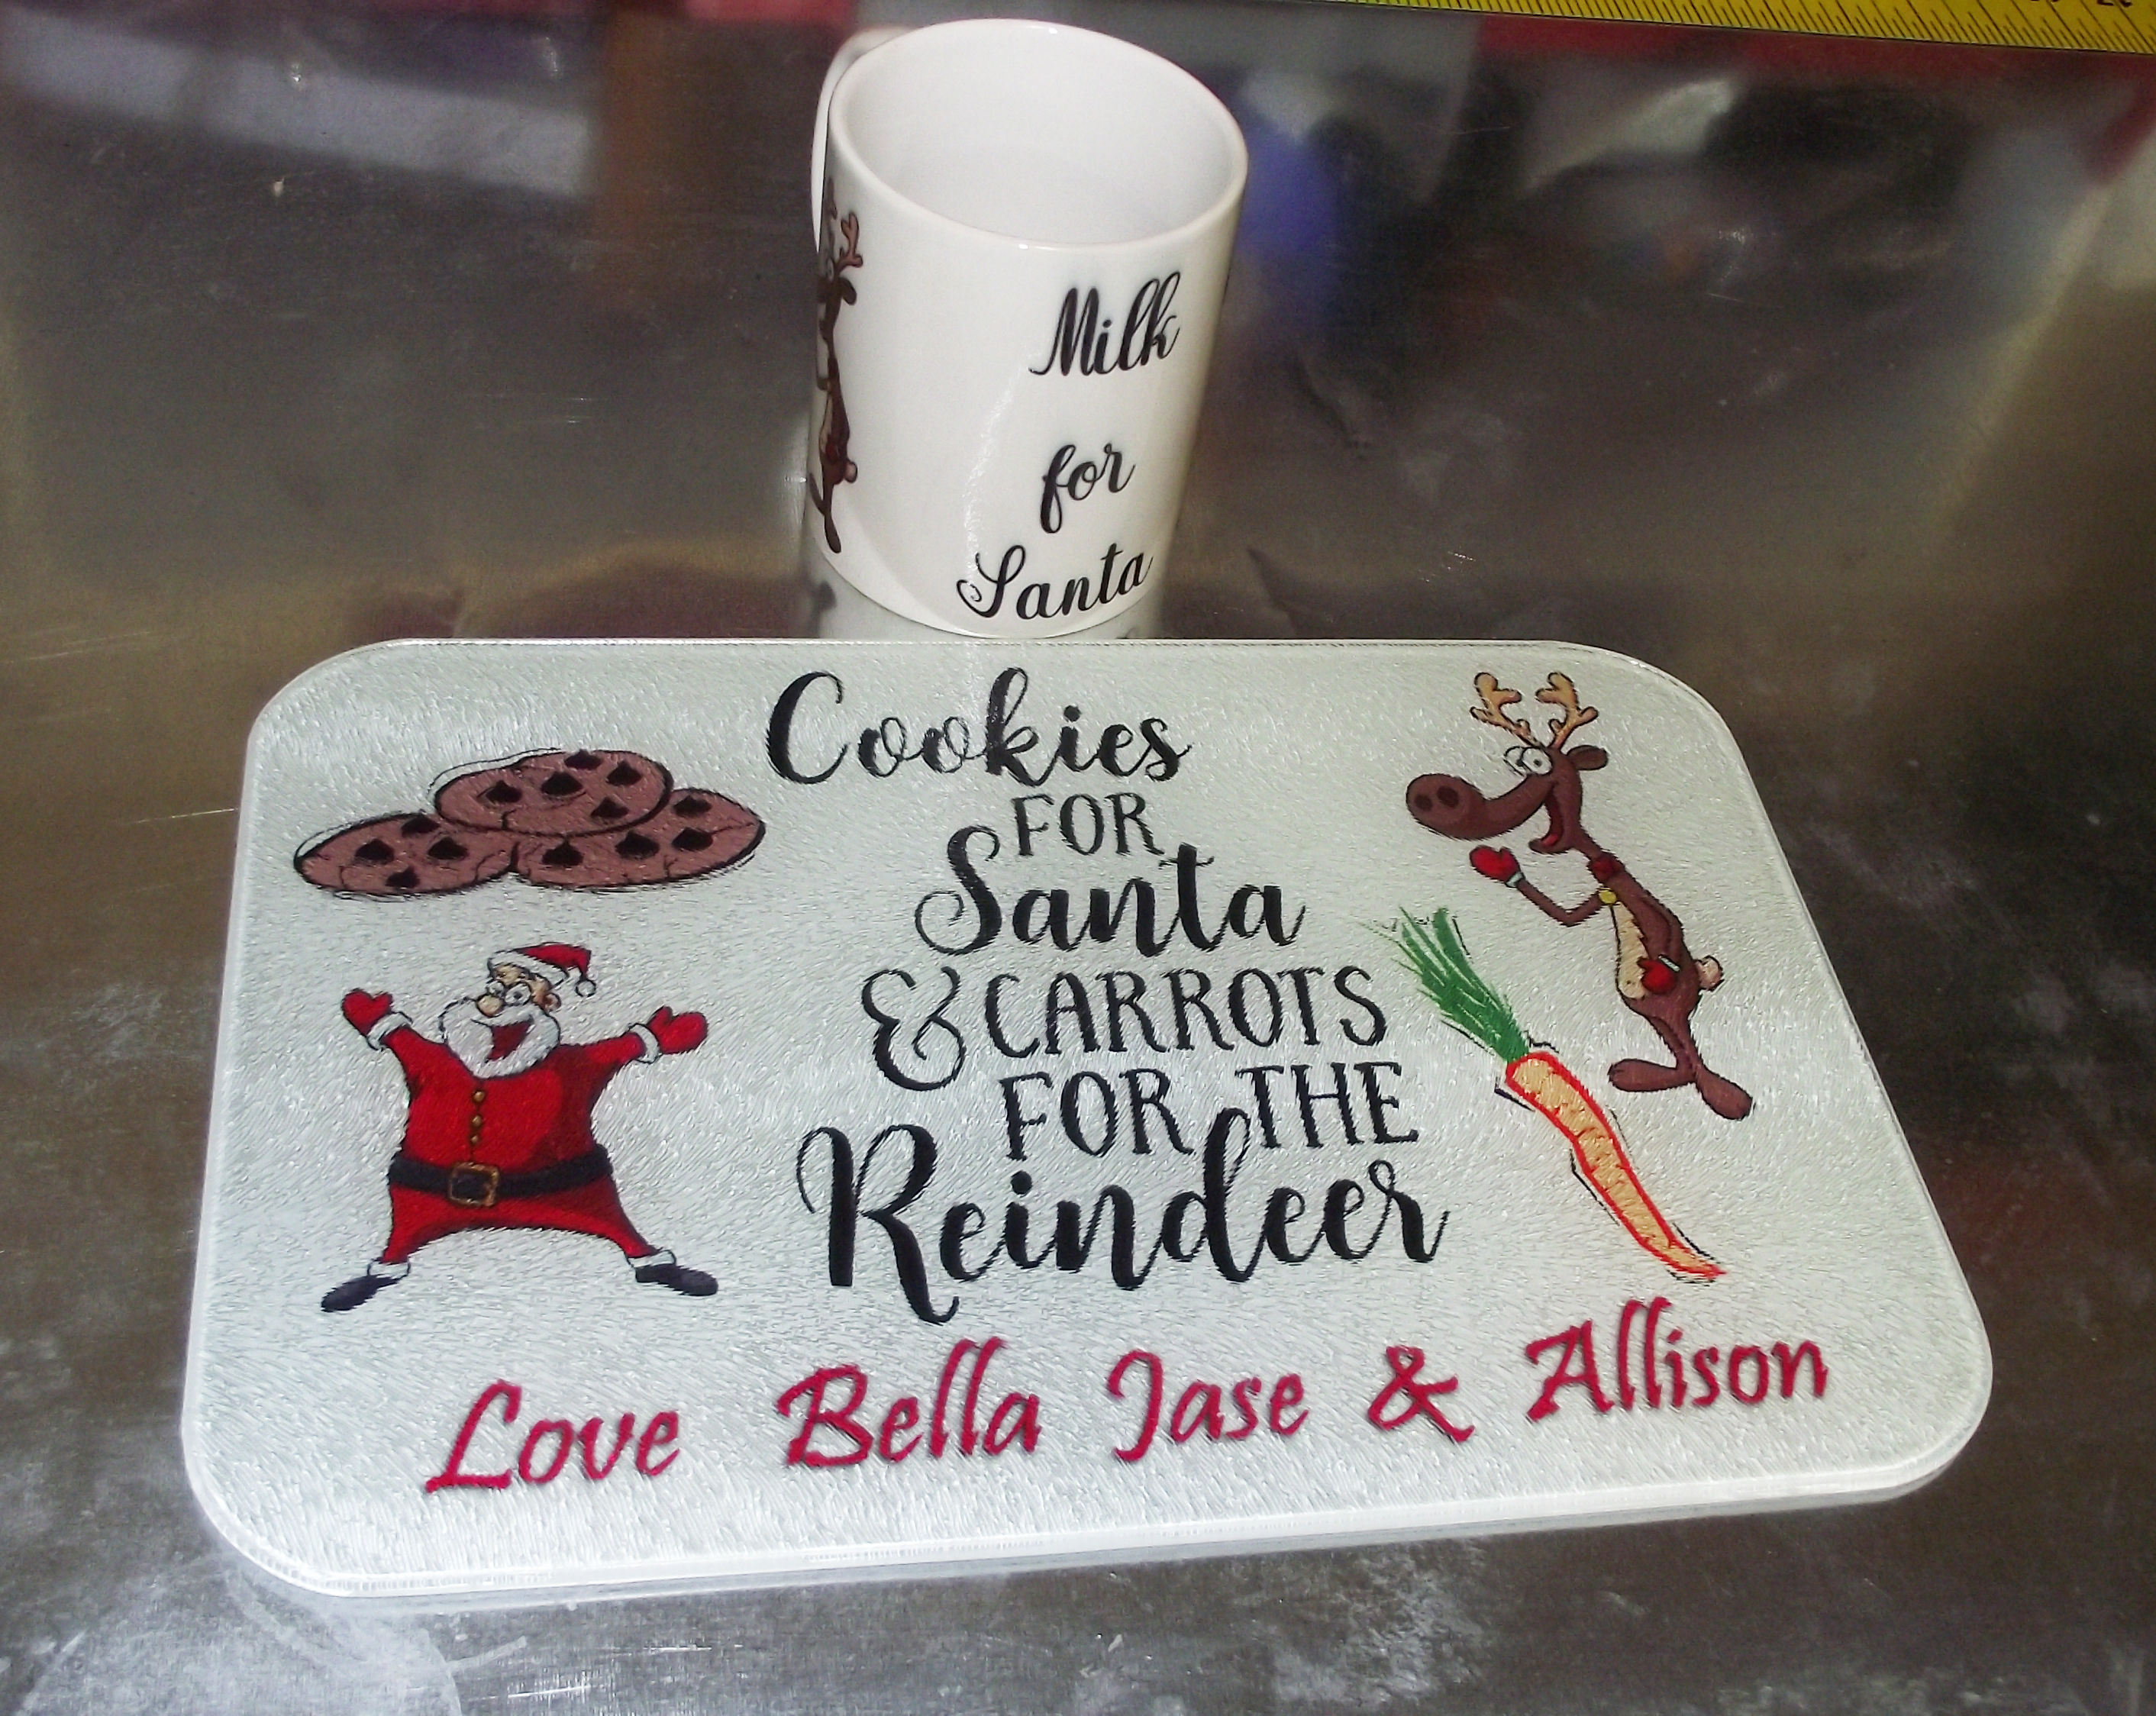 Cookies for Santa made with sublimation printing